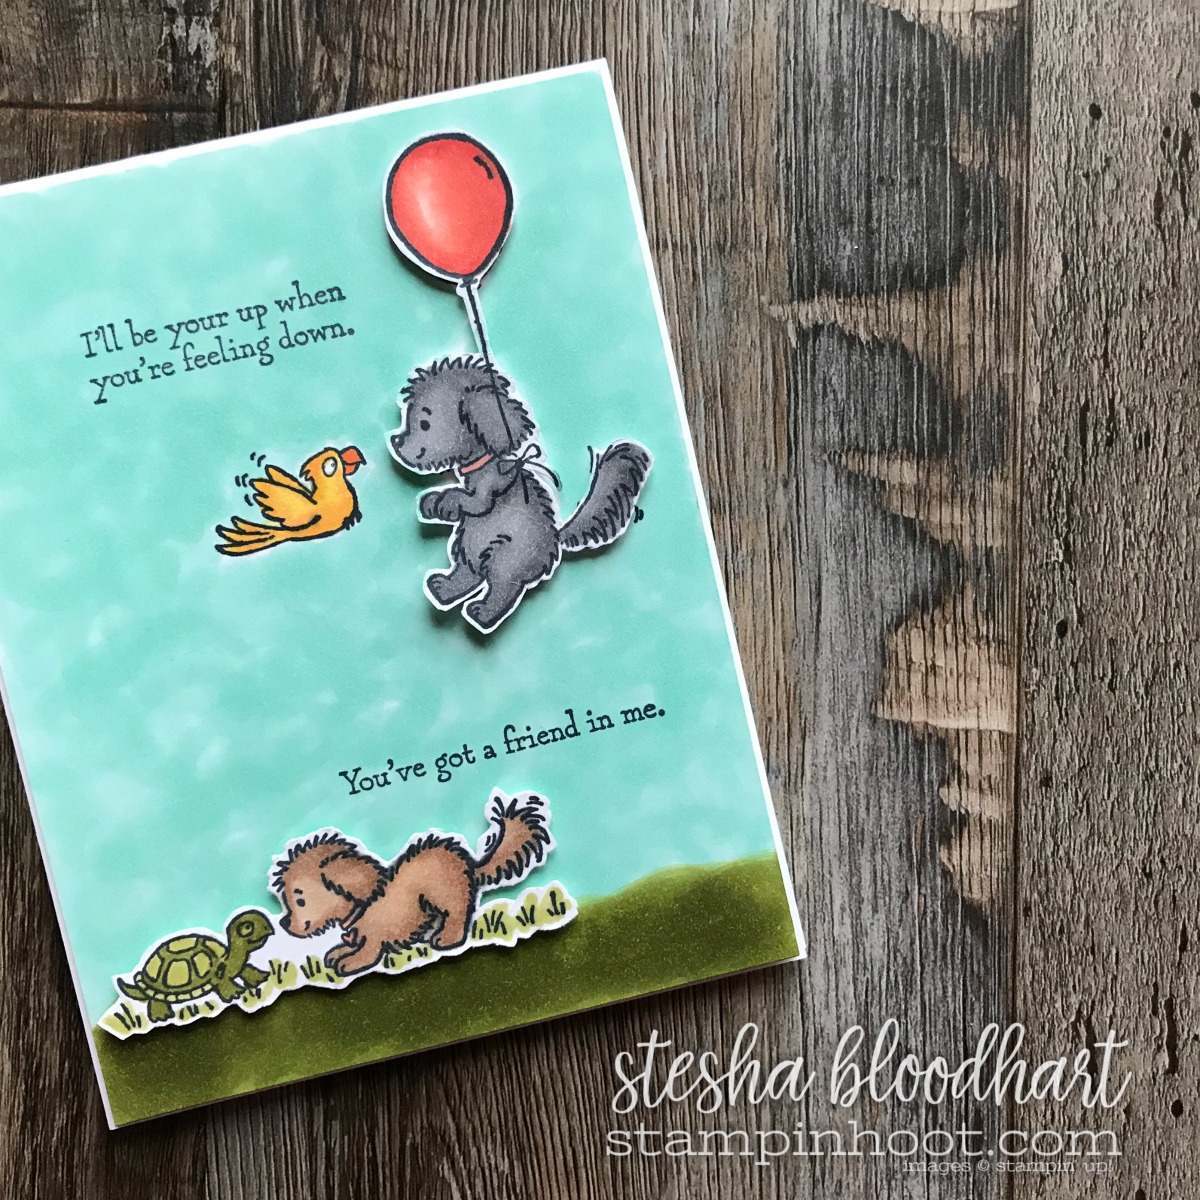 Bella & Friends Stamp Set by Stampin' Up! for the Stamp Review Crew Blog Hop, card created by Stesha Bloodhart, Stampin' Hoot! #steshabloodhart #stampinhoot